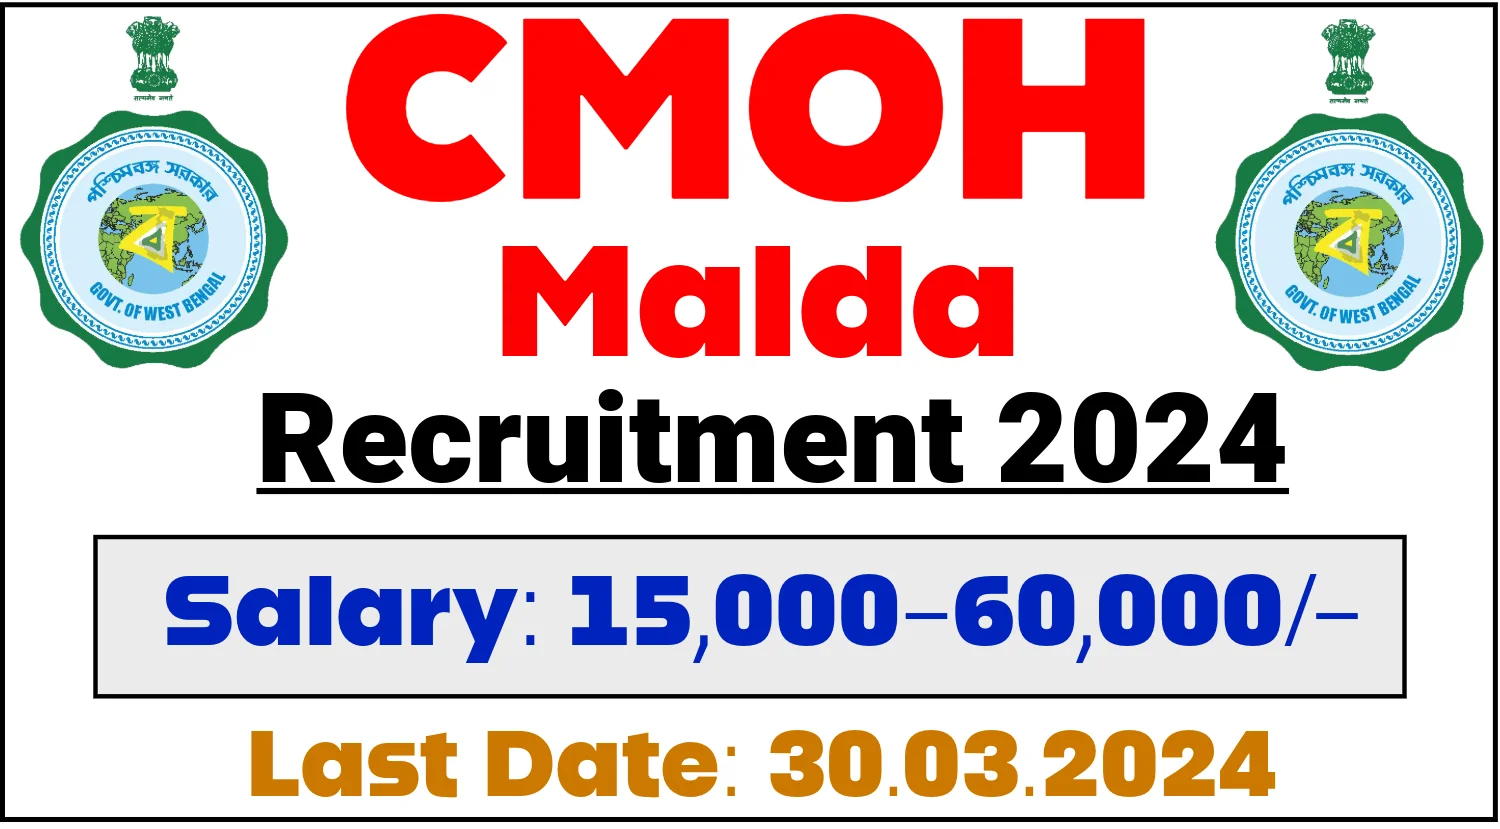 CMOH Malda Recruitment 2024 for GDMO, Nurse, and Other Posts